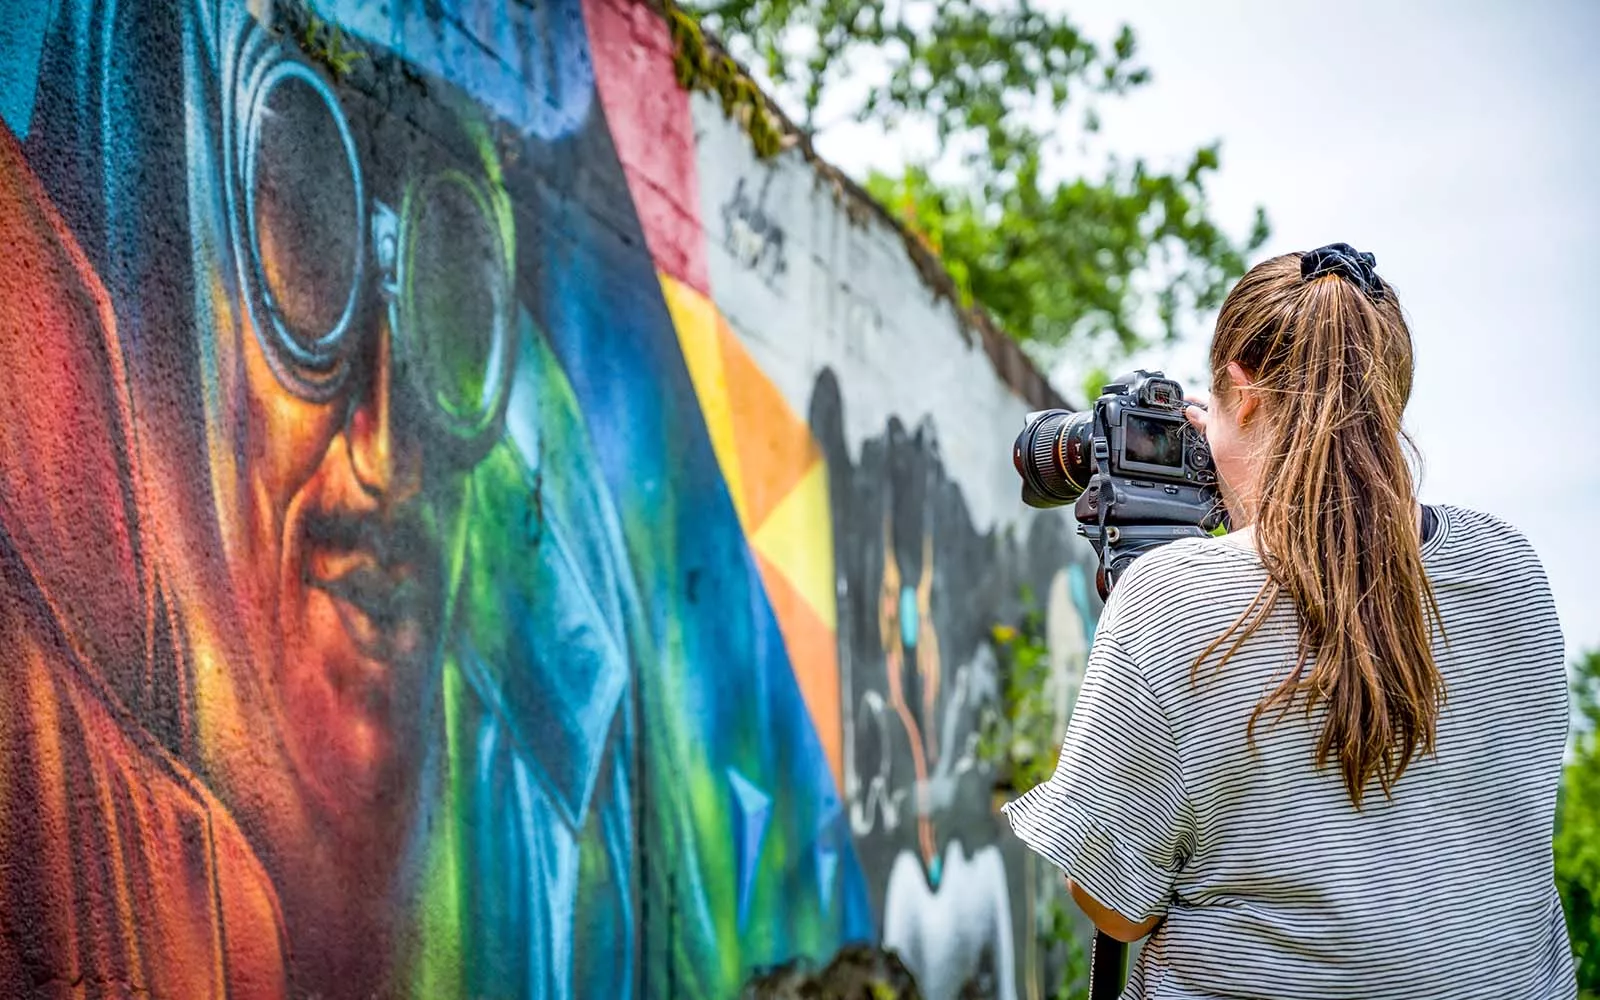 A woman with a long brown ponytail in a t-shirt takes a photo of a colorful mural.